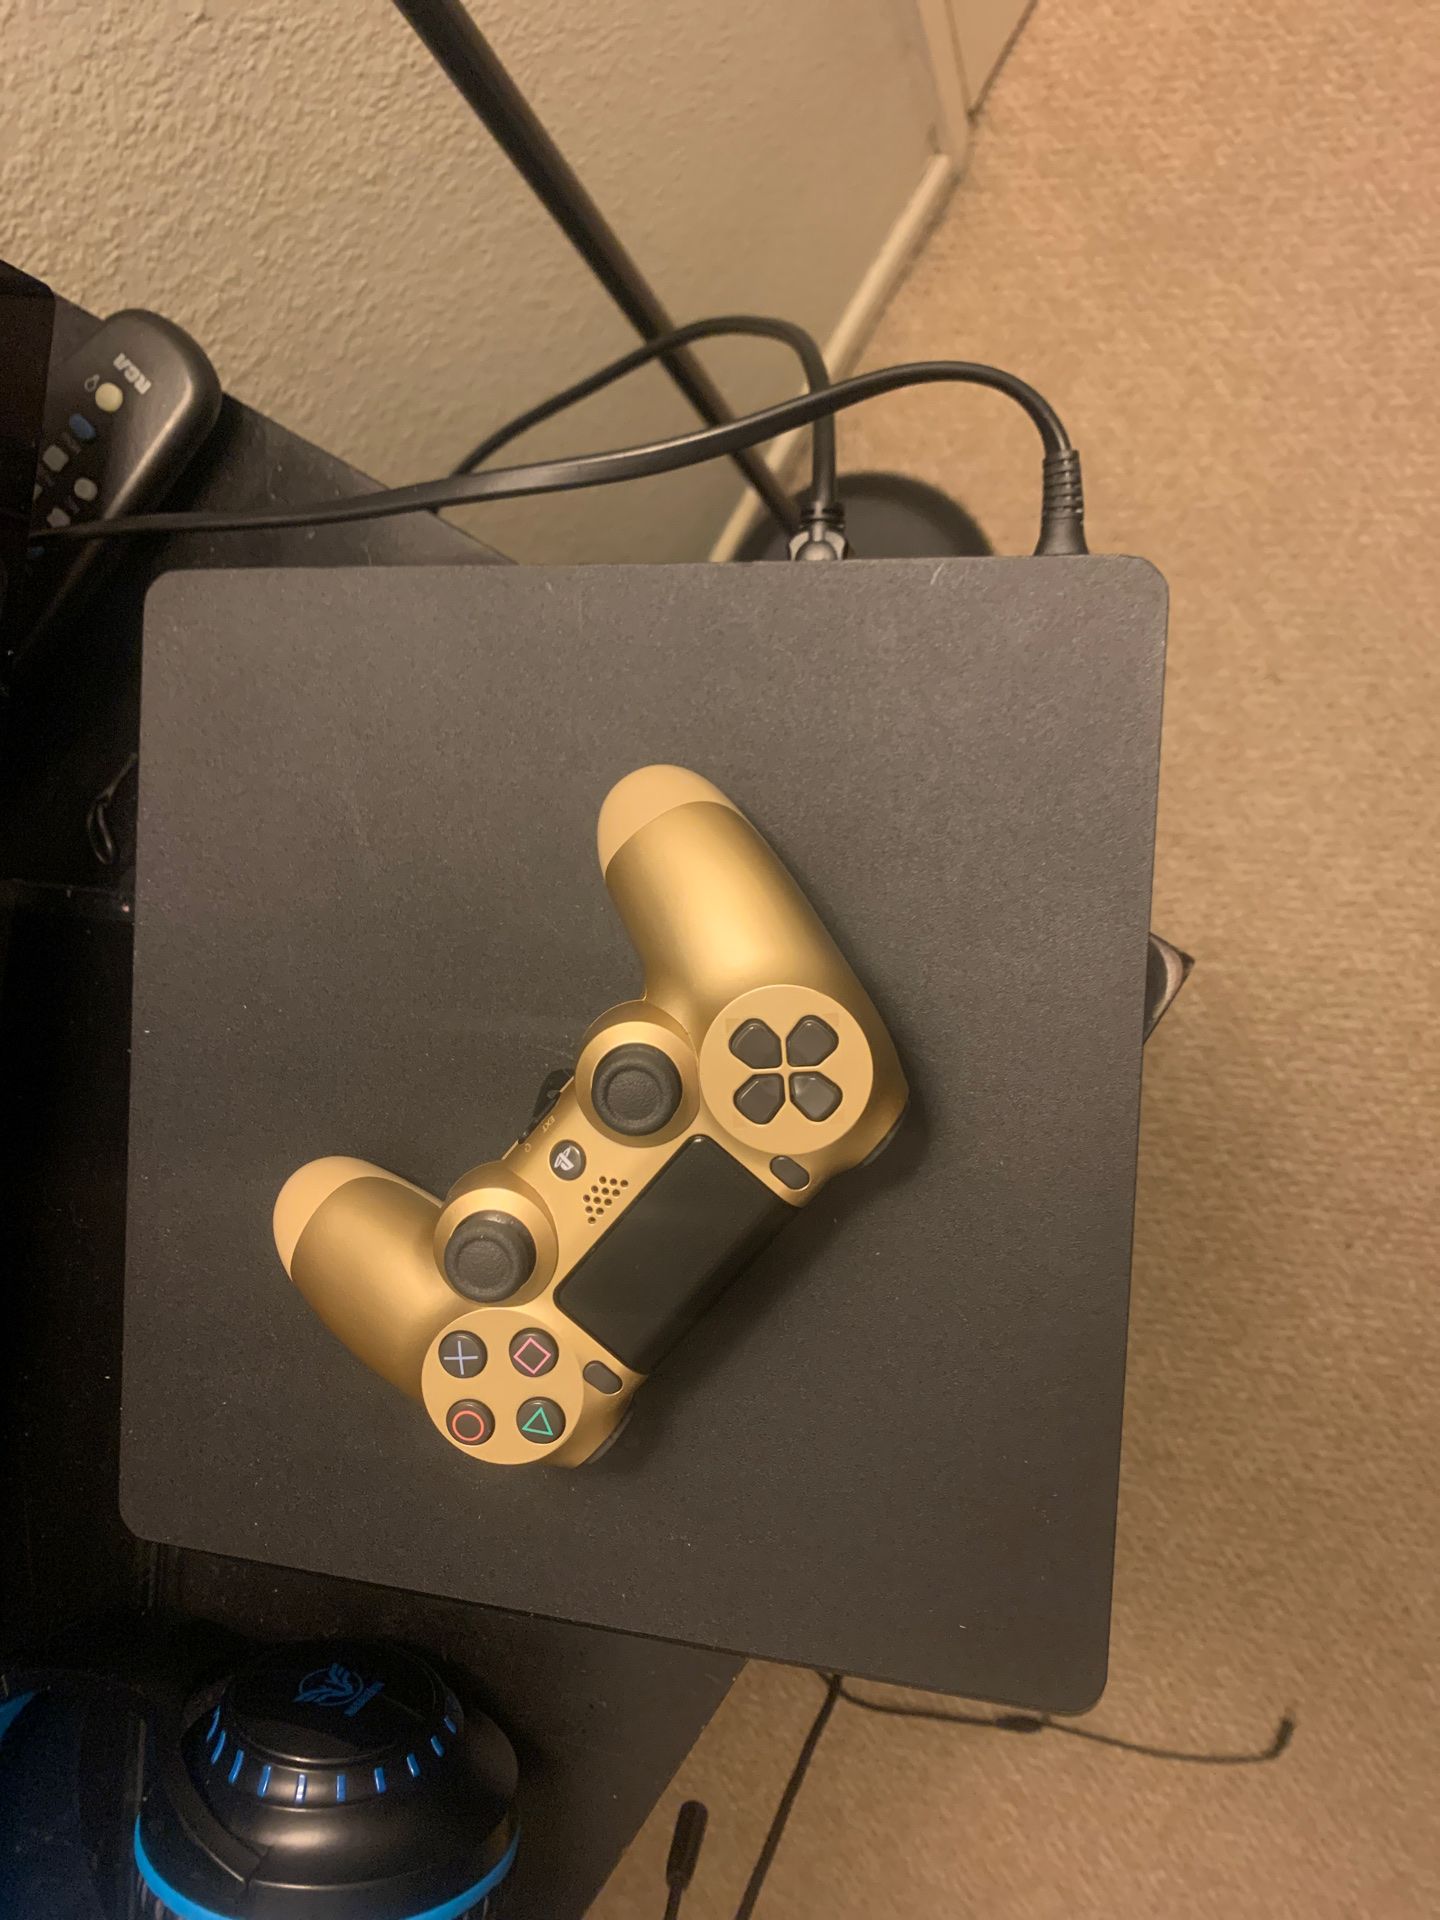 Ps4 1 terabyte with a gold controller , power cord and hdmi.